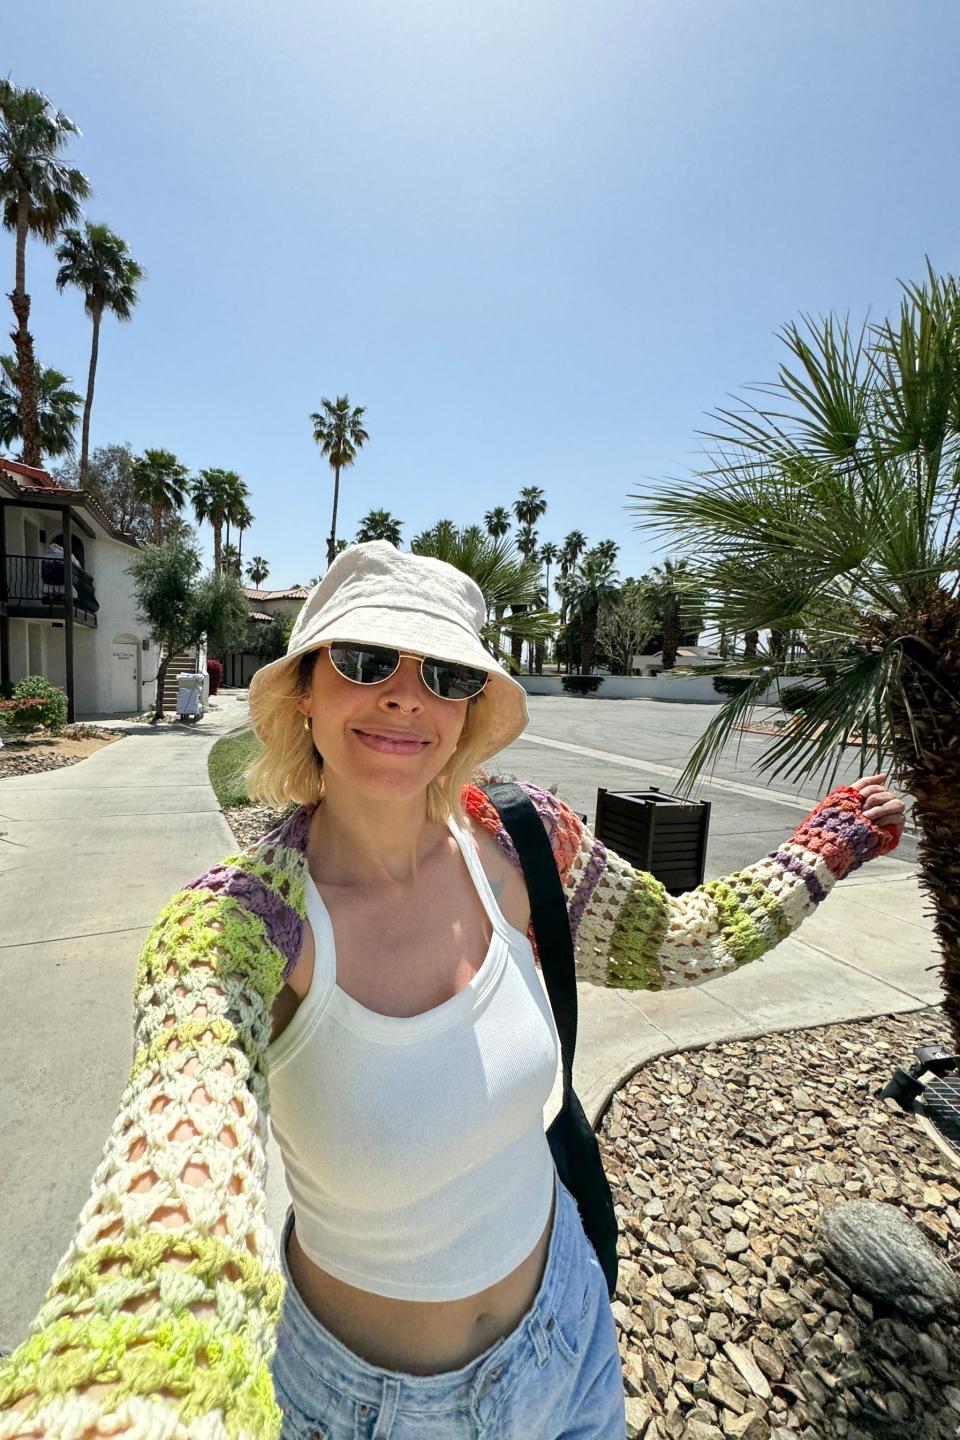 Woman in a sunhat and sunglasses takes a selfie on a sunny street with palm trees